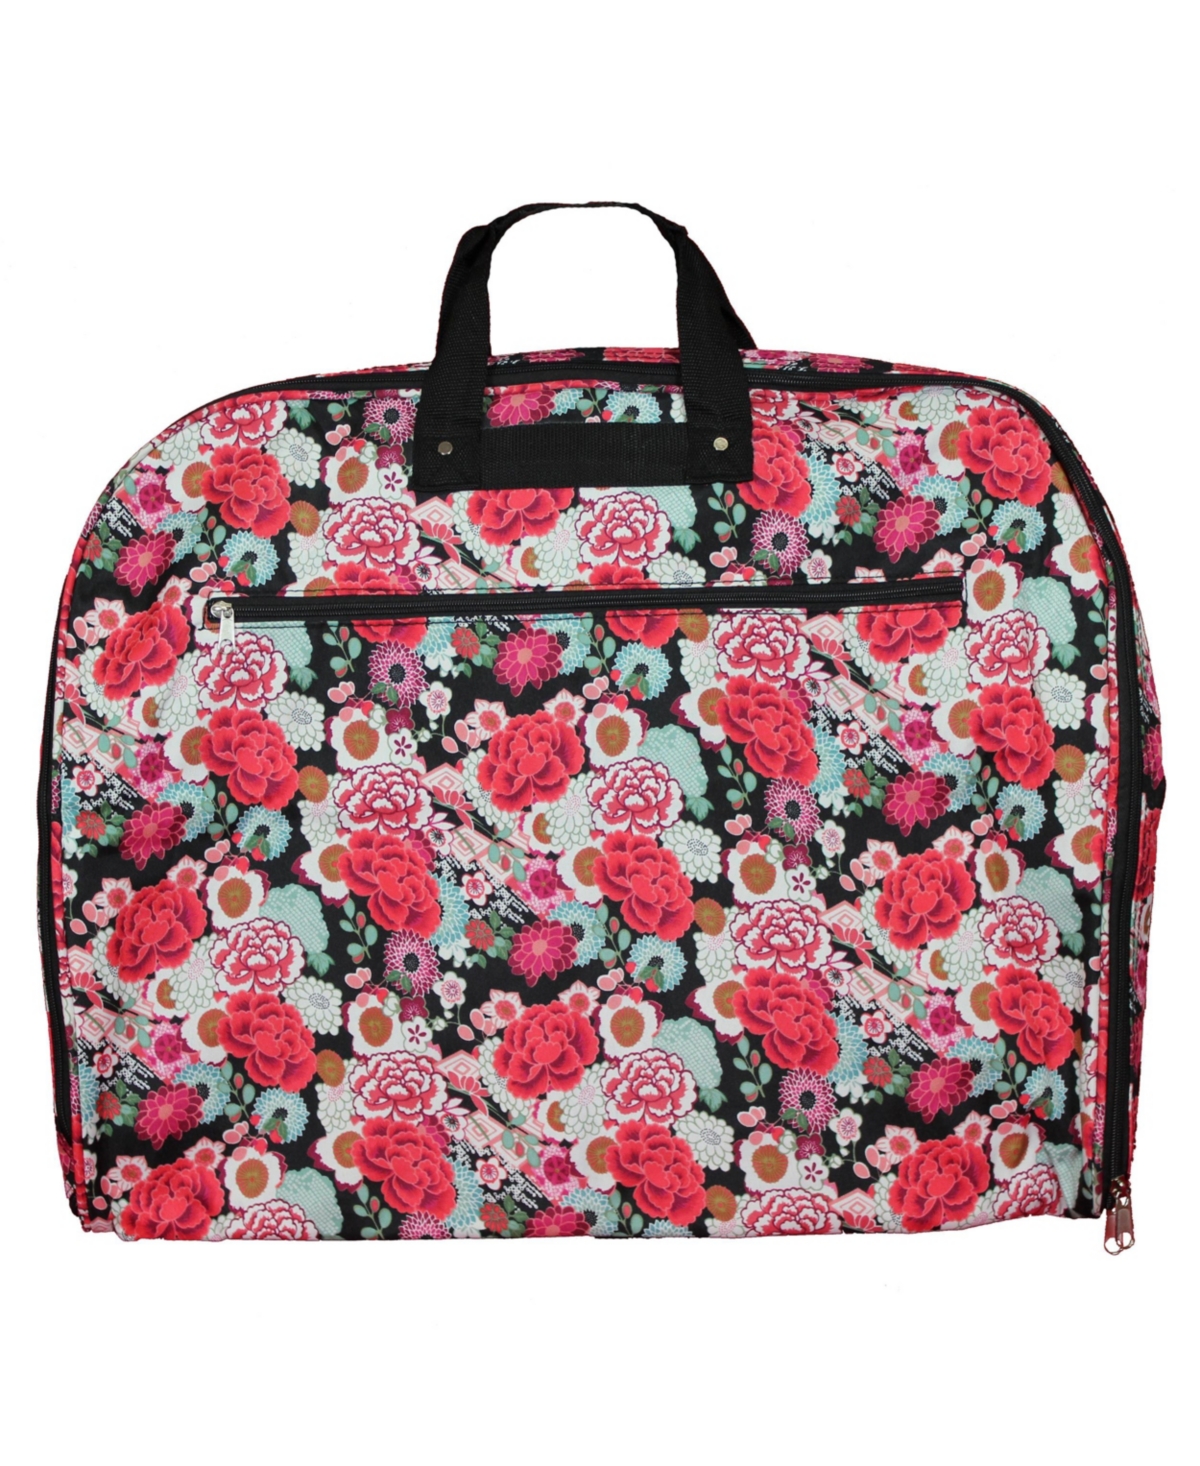 Floral 40-inch Hanging Luggage Garment Bag - Flowers